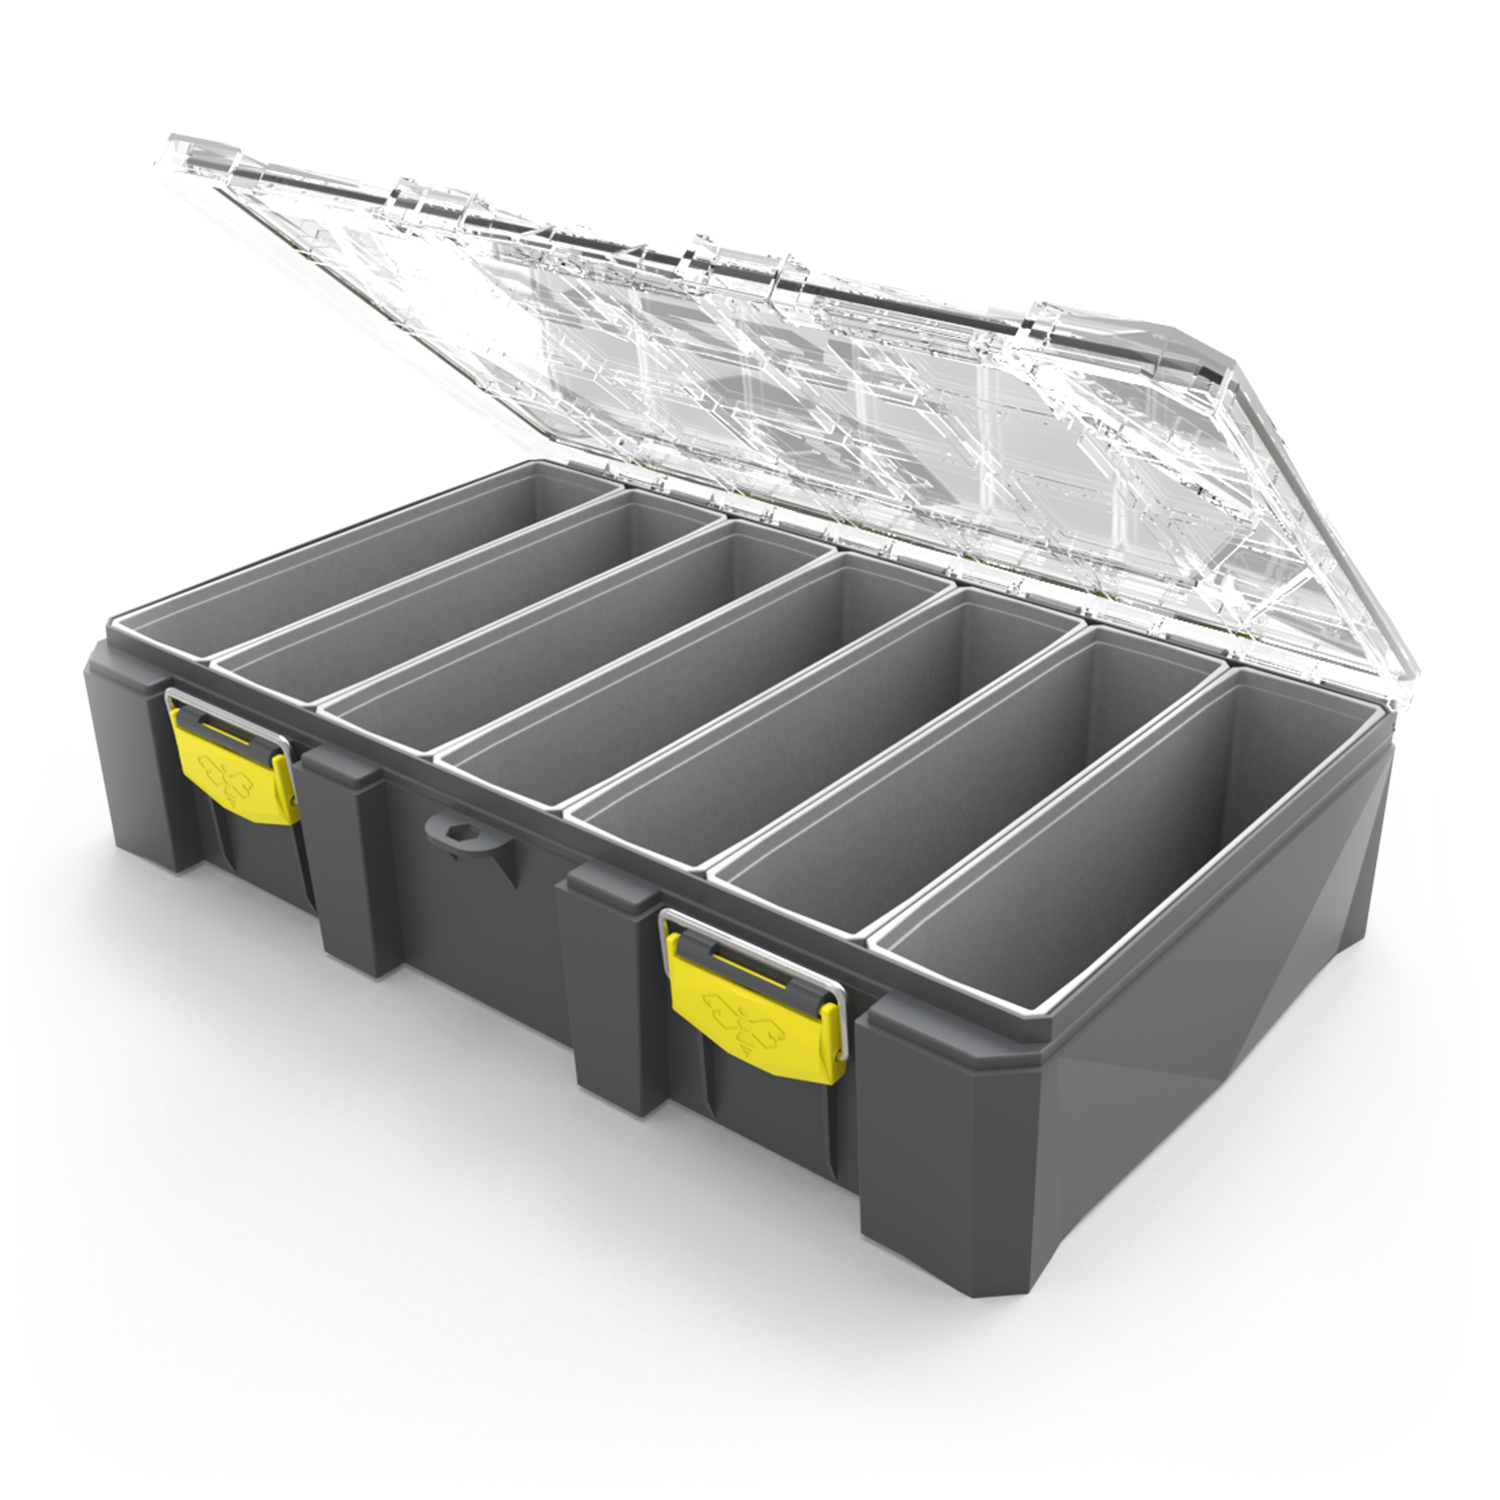 Large 6-Drawer Loaded Tackle Box